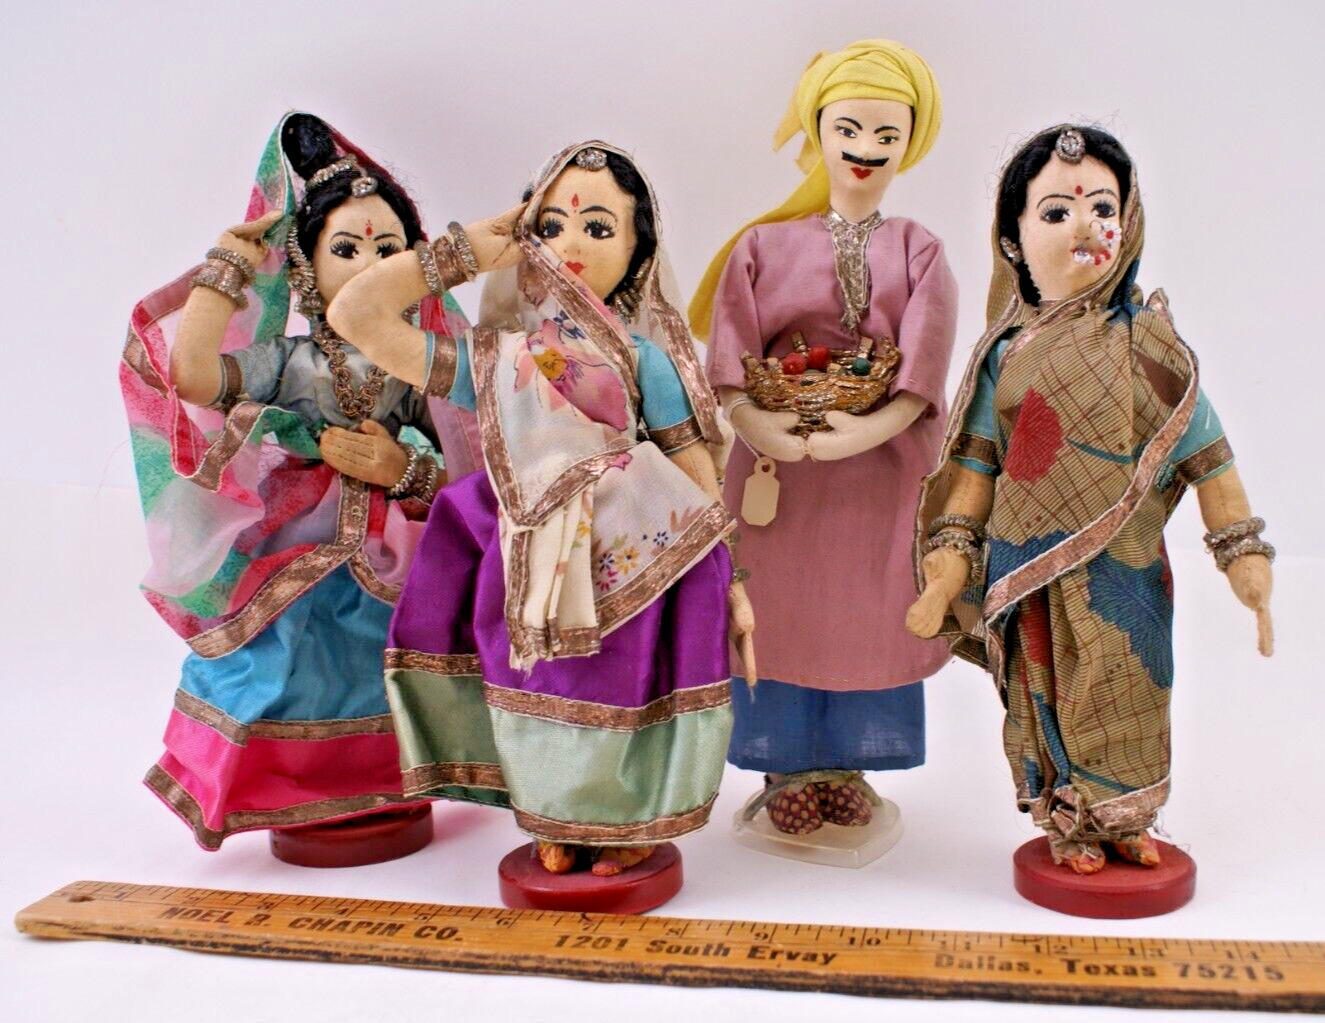 4 VINTAGE HANDMADE MIDDLE EAST INDIA / INDIAN CLOTH DOLLS CIRCA 1960'S